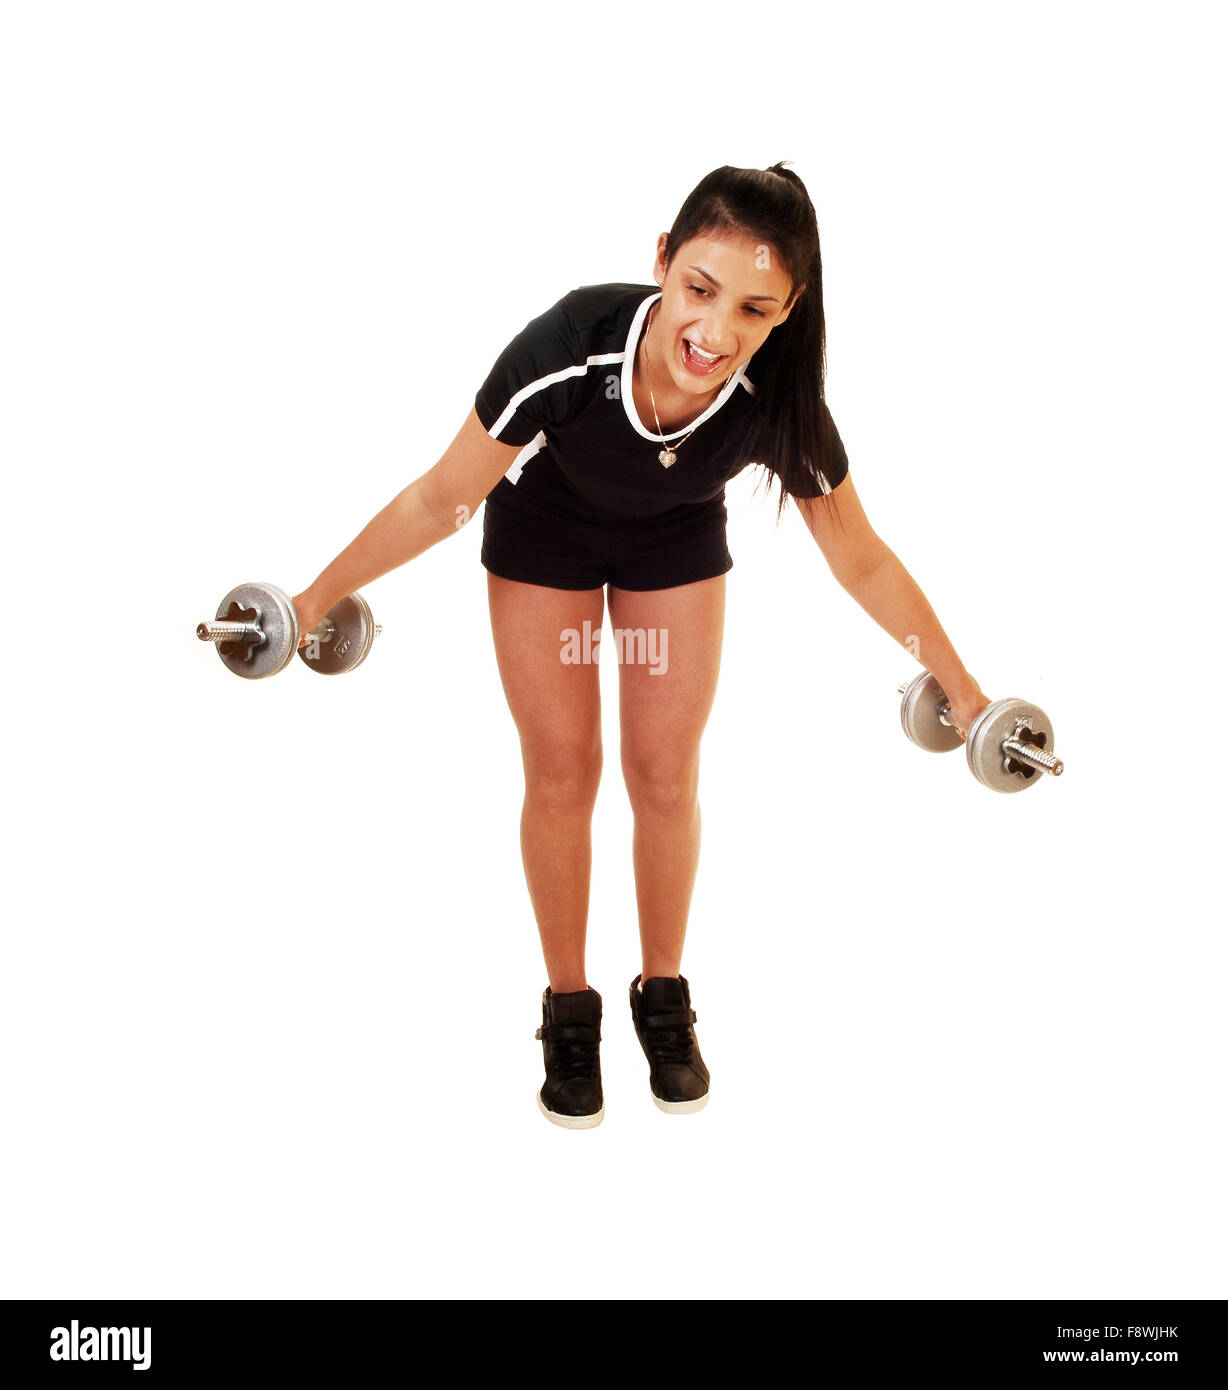 A teenager girl in a black top and shorts standing for white background lifting two dumbbells to exercise her body. Stock Photo